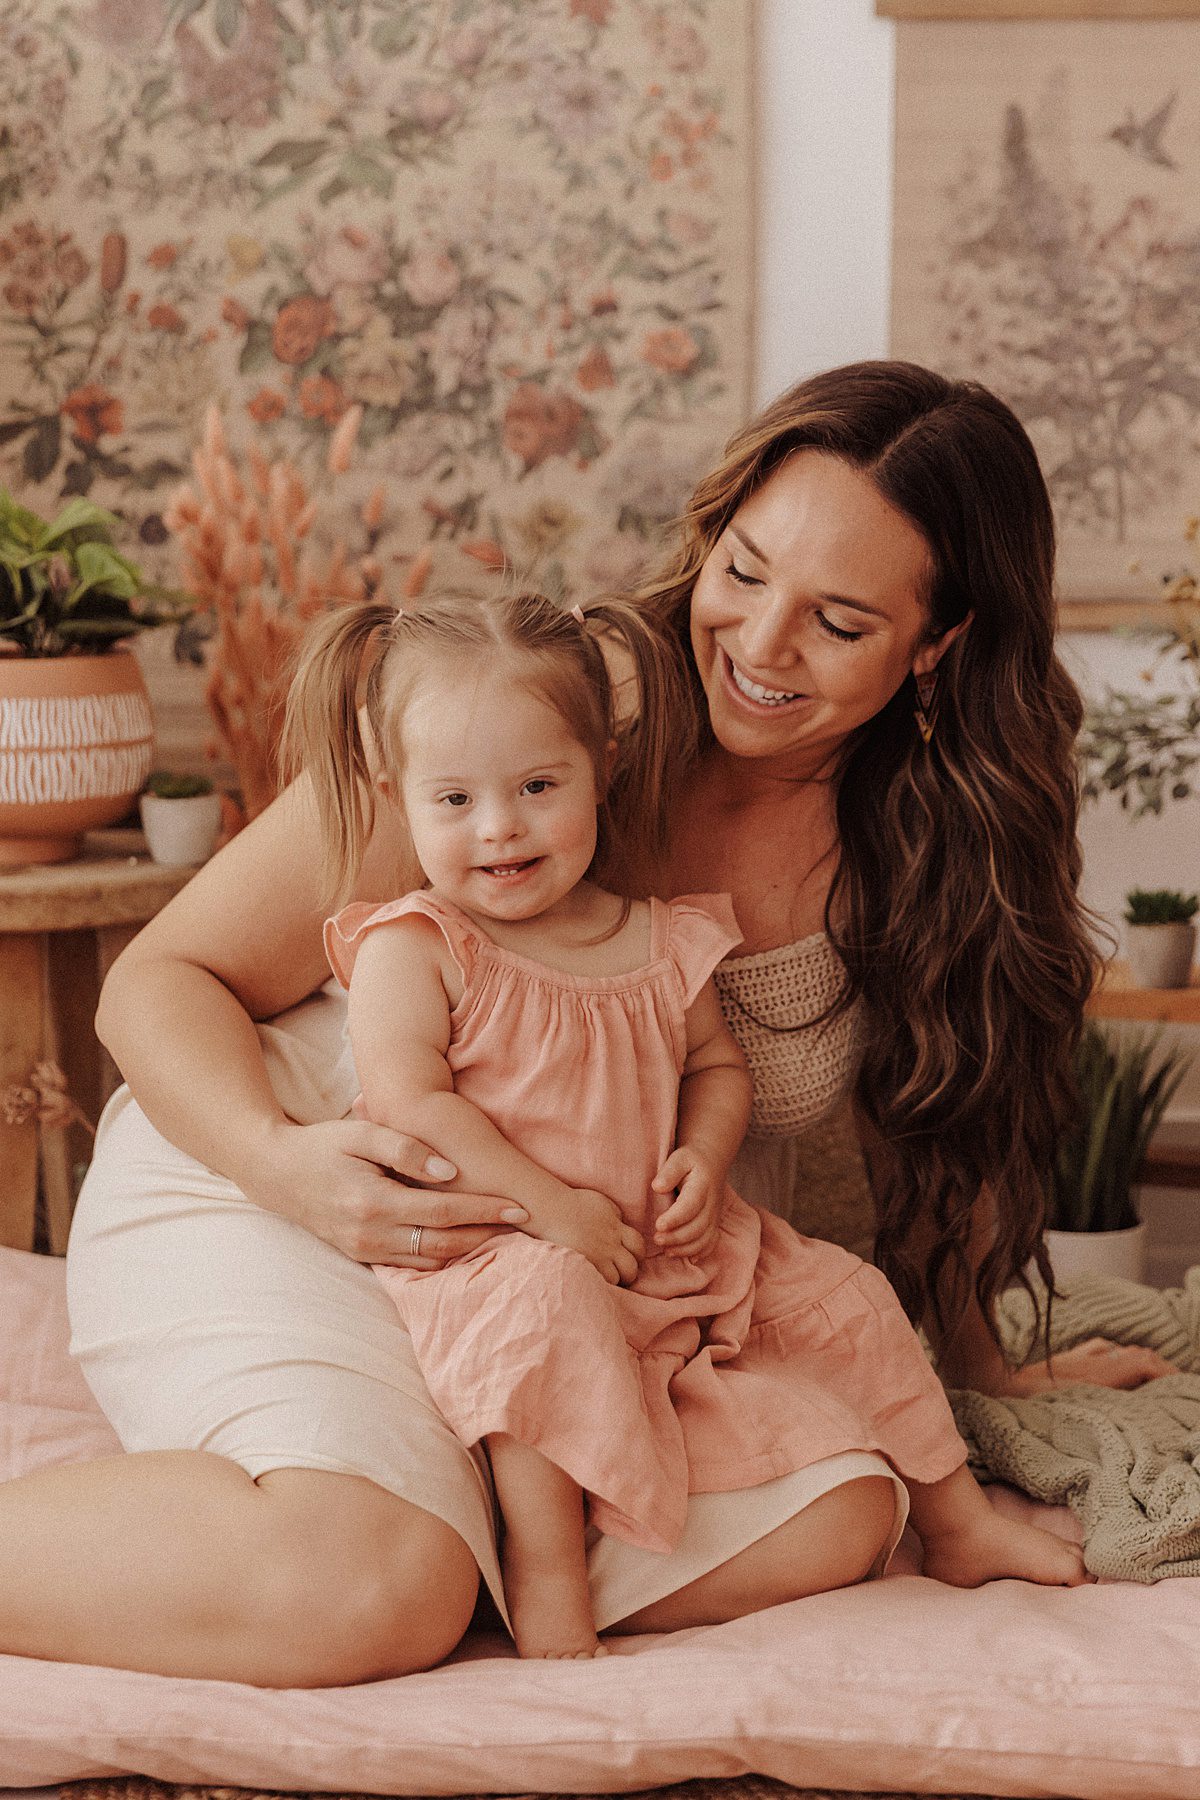 Little girl sits on her mother's lap and smiles at the camera for a photoshoot